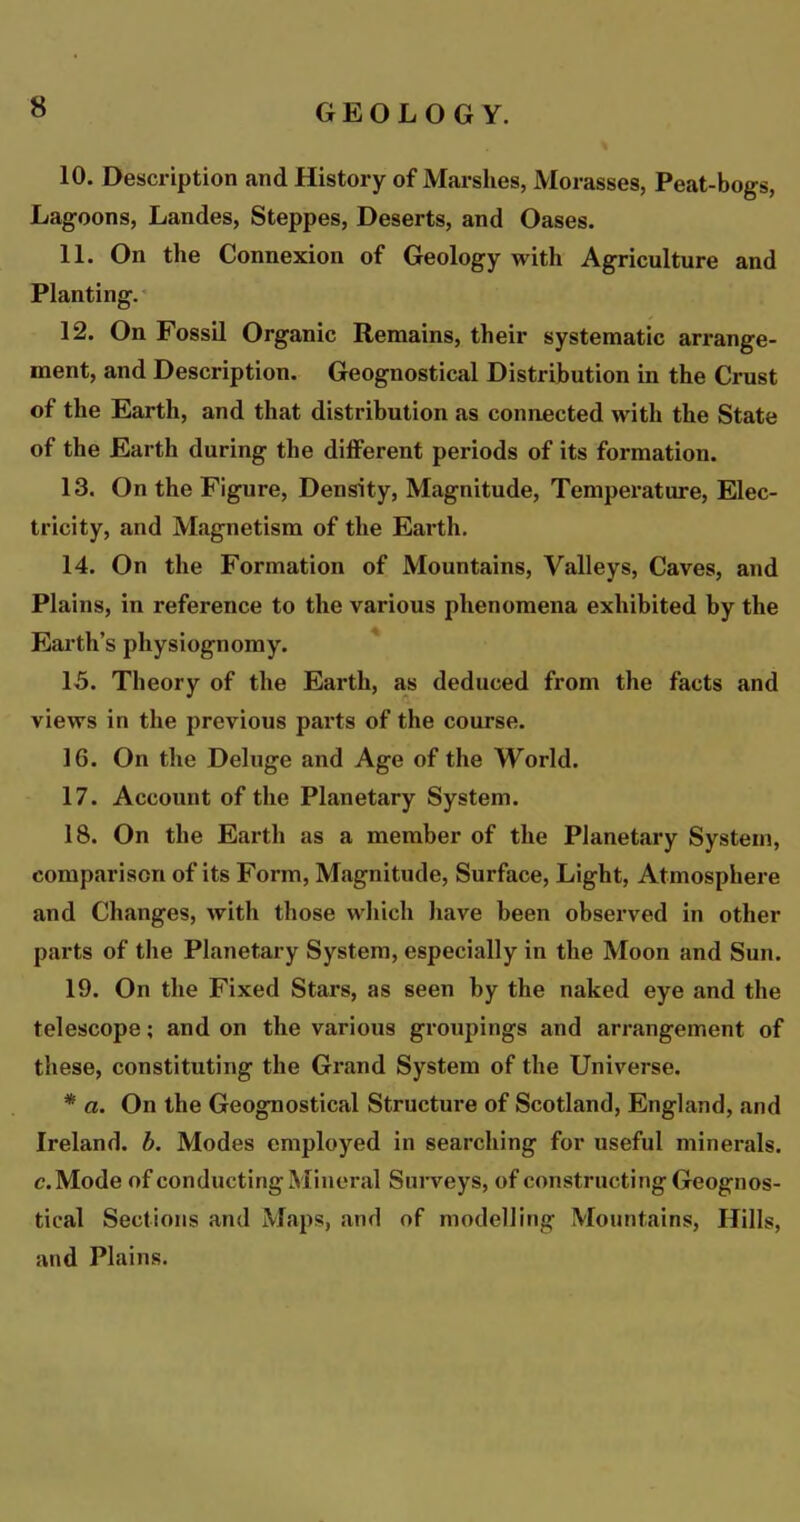 10. Description and History of Marshes, Morasses, Peat-bogs, Lagoons, Landes, Steppes, Deserts, and Oases. H. On the Connexion of Geology with Agriculture and Planting. 12. On Fossil Organic Remains, their systematic arrange- ment, and Description. Geognostical Distribution in the Crust of the Earth, and that distribution as connected with the State of the Earth during the different periods of its formation. 13. On the Figure, Density, Magnitude, Temperature, Elec- tricity, and Magnetism of the Earth. 14. On the Formation of Mountains, Valleys, Caves, and Plains, in reference to the various phenomena exhibited by the Earth’s physiognomy. 15. Theory of the Earth, as deduced from the facts and views in the previous parts of the course. 16. On the Deluge and Age of the World. 17. Account of the Planetary System. 18. On the Earth as a member of the Planetary System, comparison of its Form, Magnitude, Surface, Light, Atmosphere and Changes, with those which have been observed in other parts of the Planetary System, especially in the Moon and Sun. 19. On the Fixed Stars, as seen by the naked eye and the telescope; and on the various groupings and arrangement of these, constituting the Grand System of the Universe. * a. On the Geognostical Structure of Scotland, England, and Ireland, b. Modes employed in searching for useful minerals, e. Mode of conducting Mineral Surveys, of constructing Geognos- tical Sections and Maps, and of modelling Mountains, Hills, and Plains.